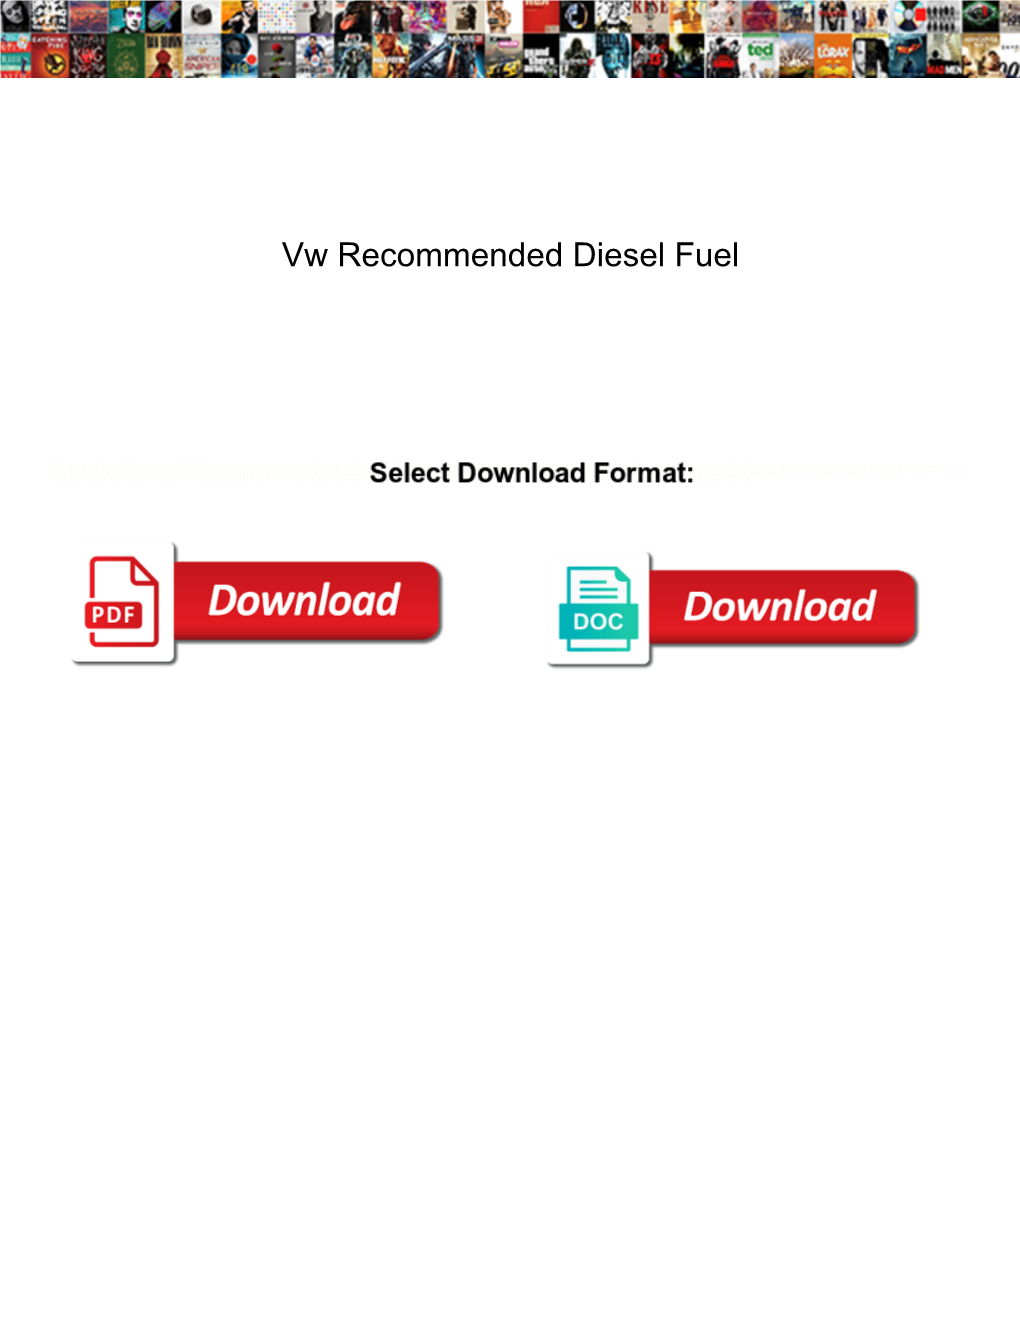 Vw Recommended Diesel Fuel